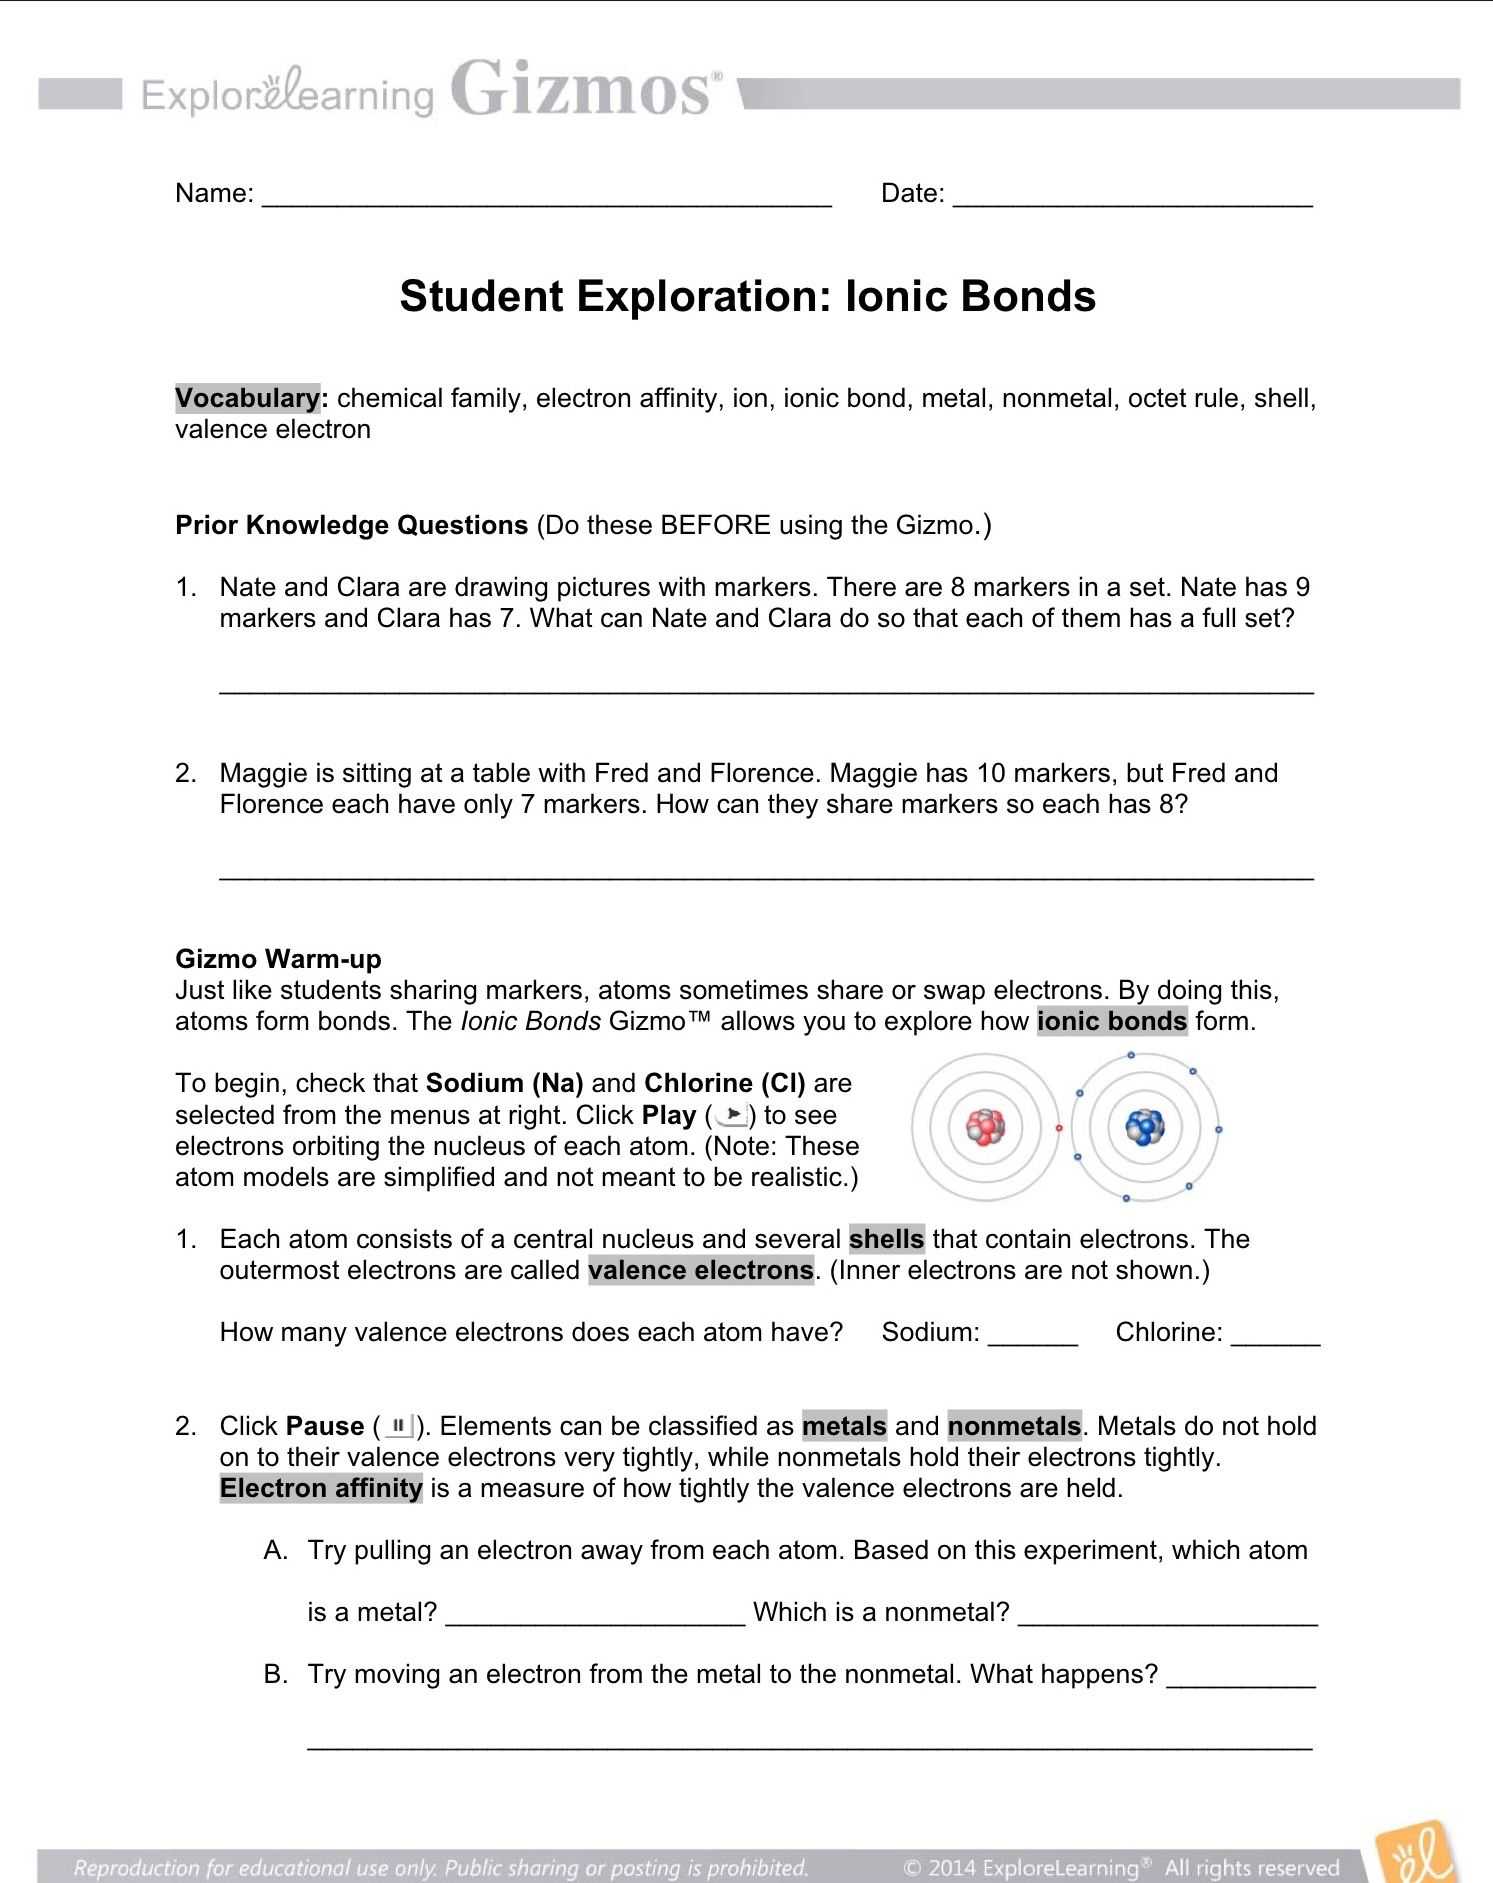 Simple and Compound Interest Worksheet Answers Along with Ionic Bonds Student Exploration Gizmo Worksheet